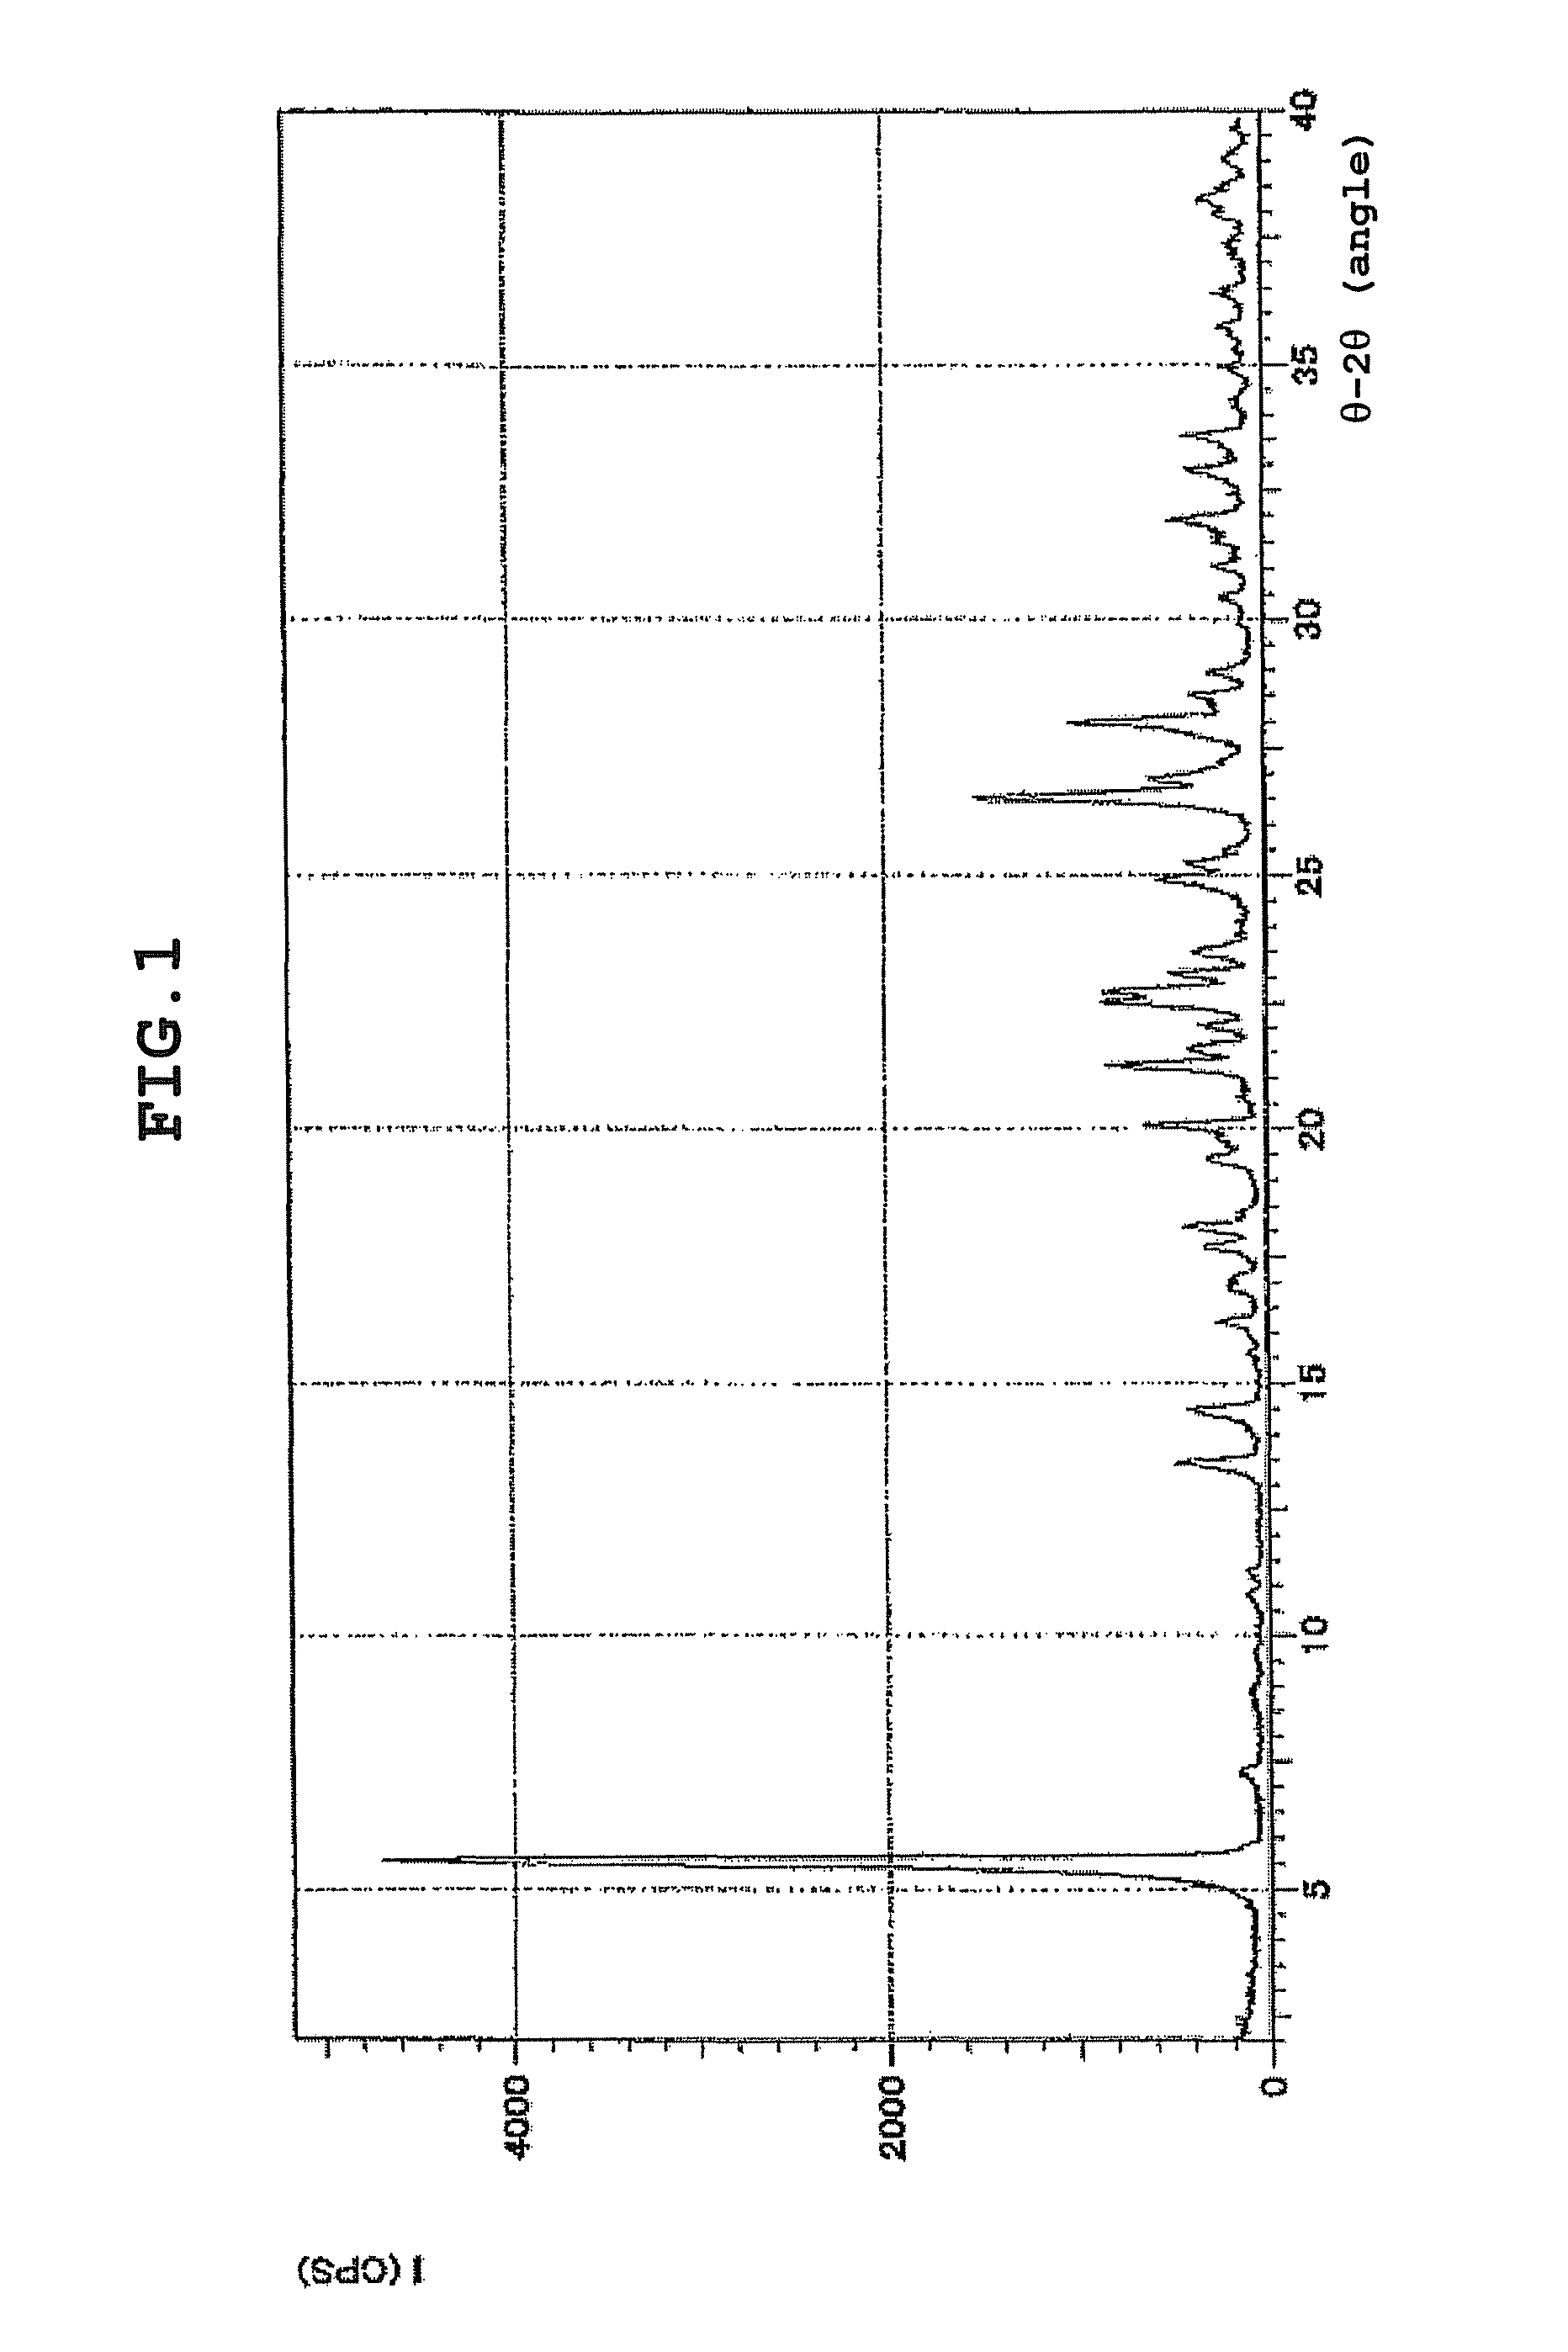 Salt of proline derivative, solvate thereof, and production method thereof